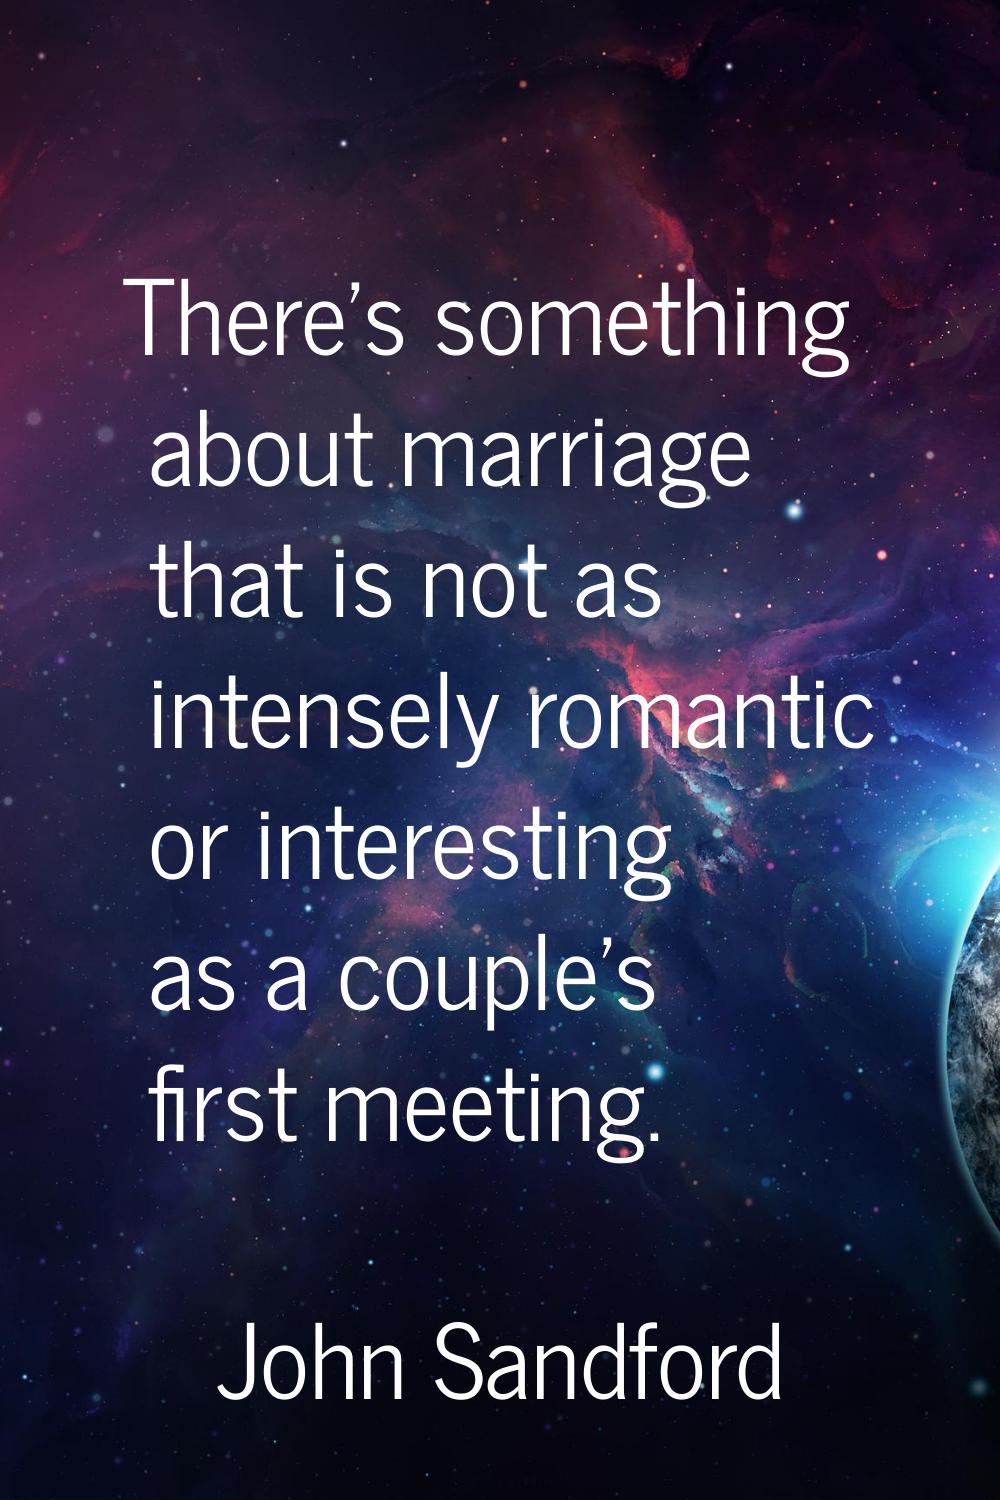 There's something about marriage that is not as intensely romantic or interesting as a couple's fir